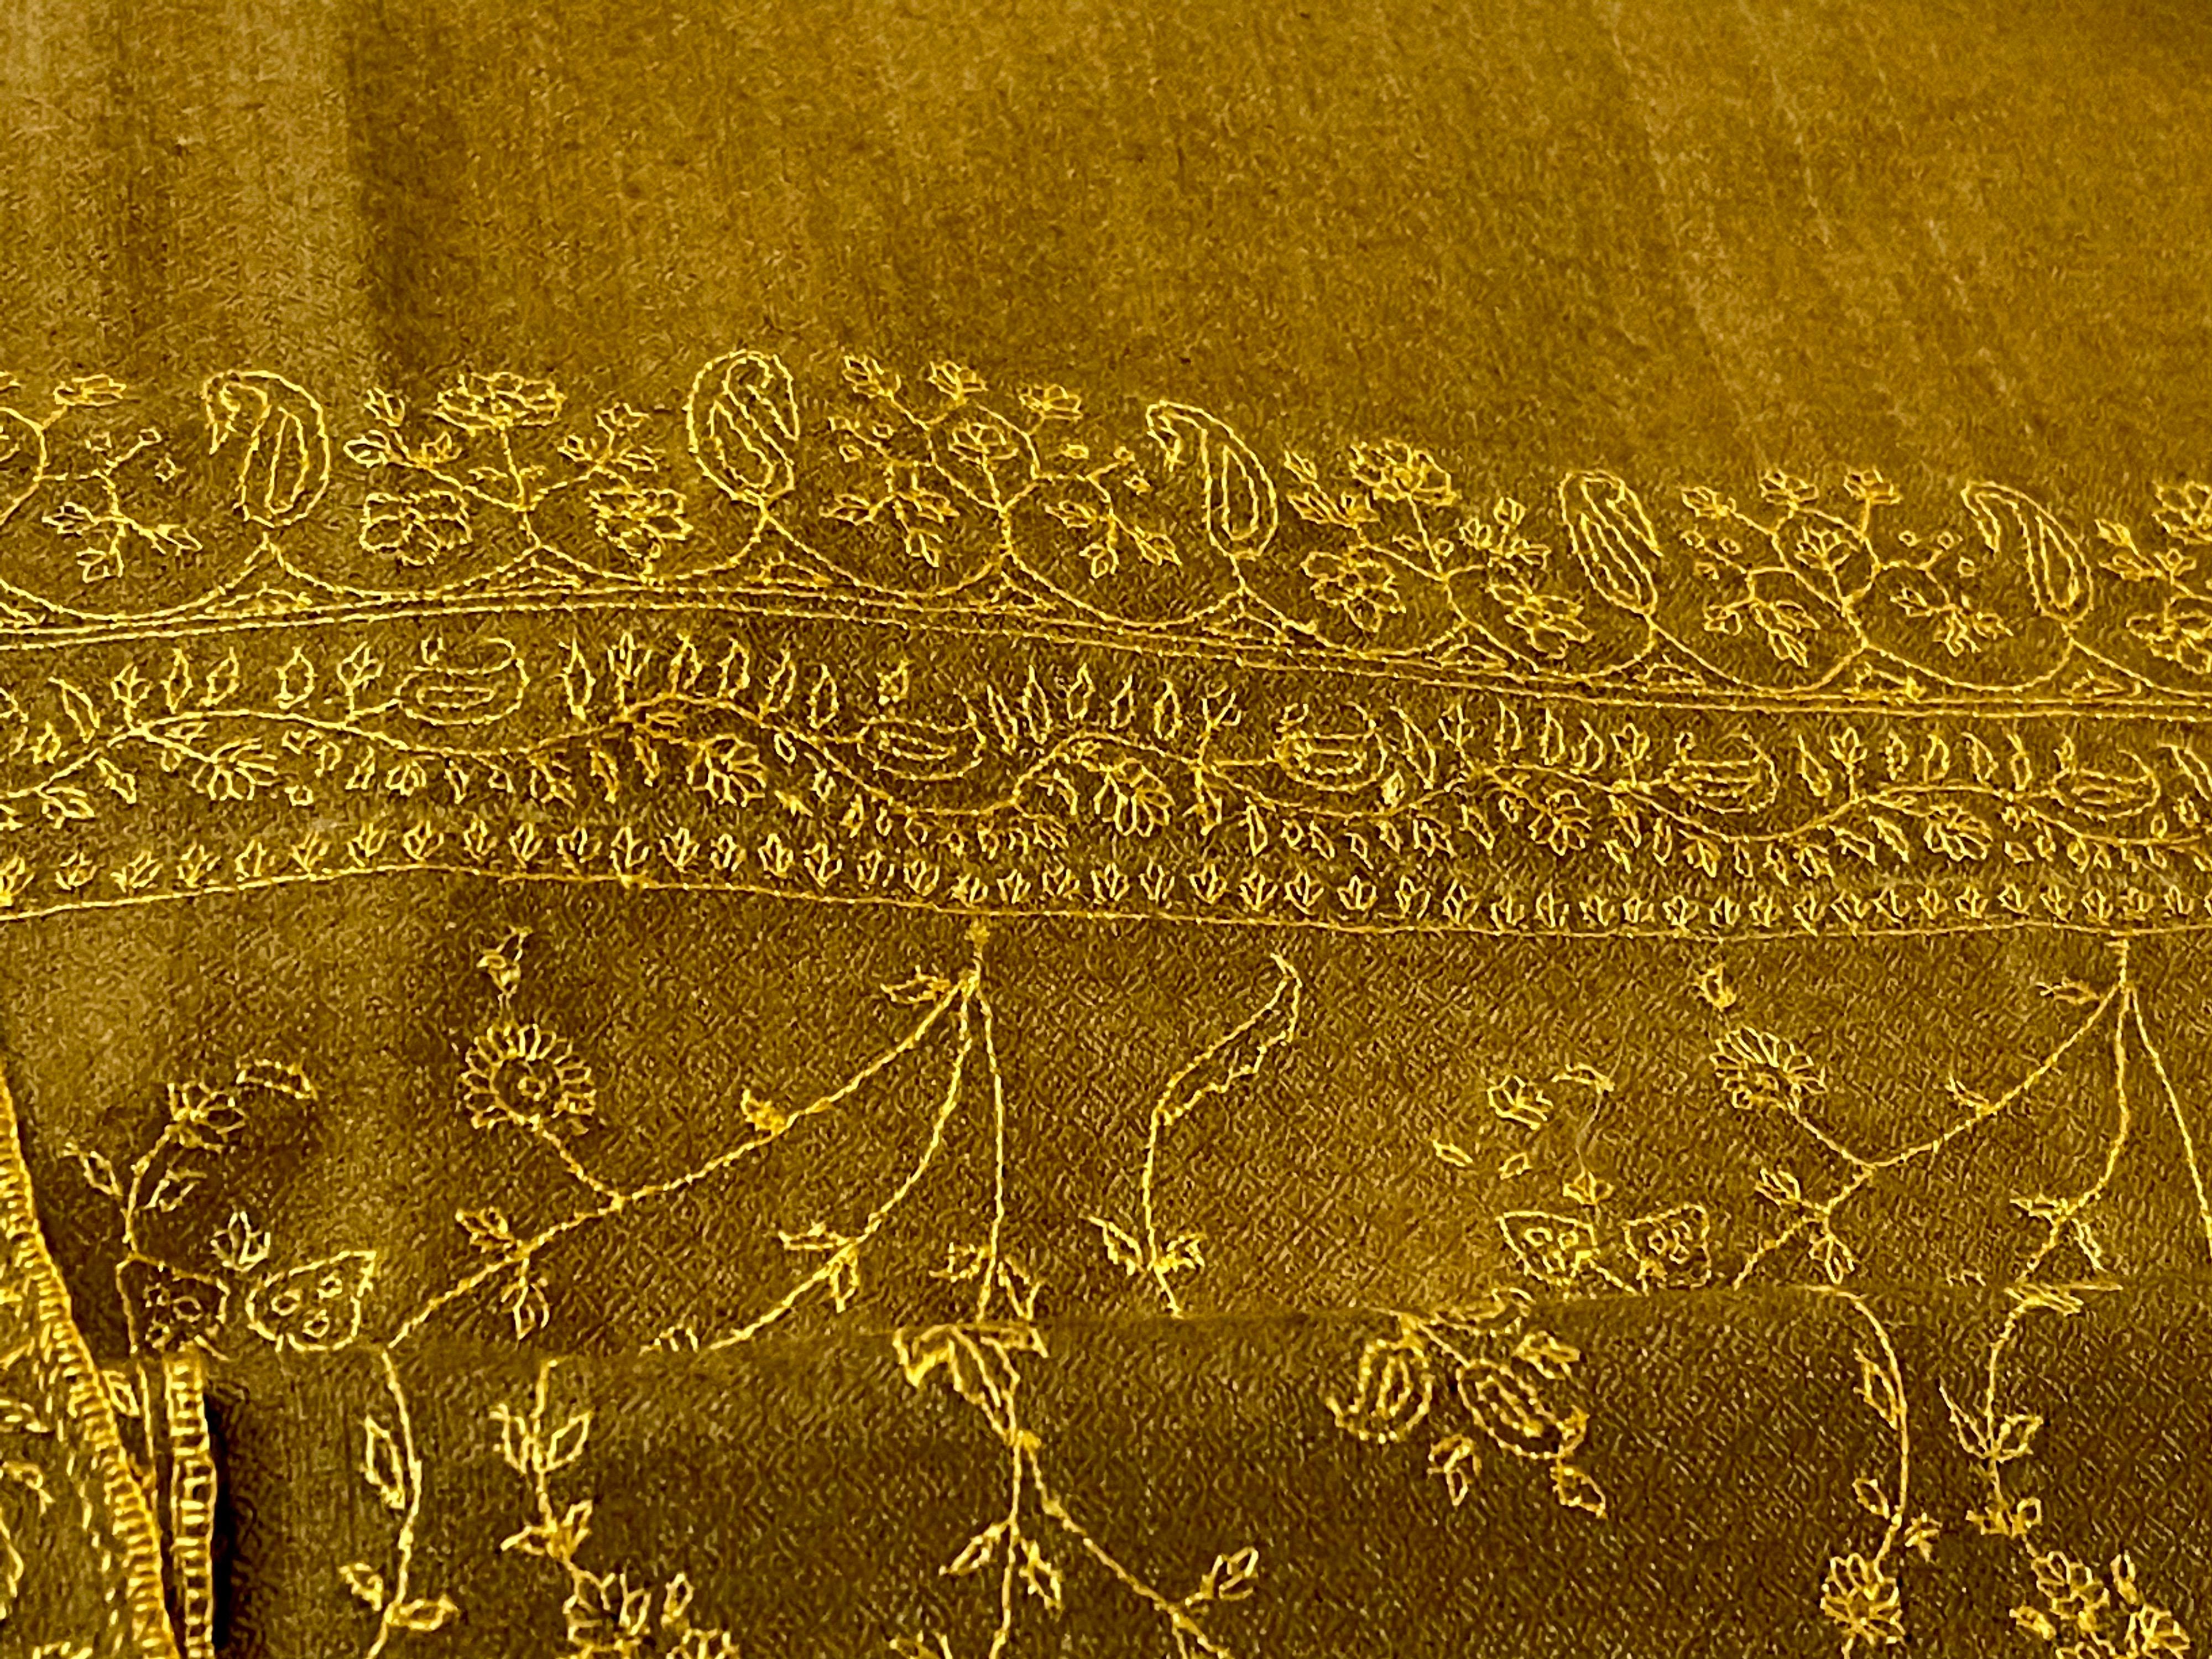 Women's Hand Embroidered 100% Cashmere Pashmina Shawl Golden Brown Made in Kashmir 